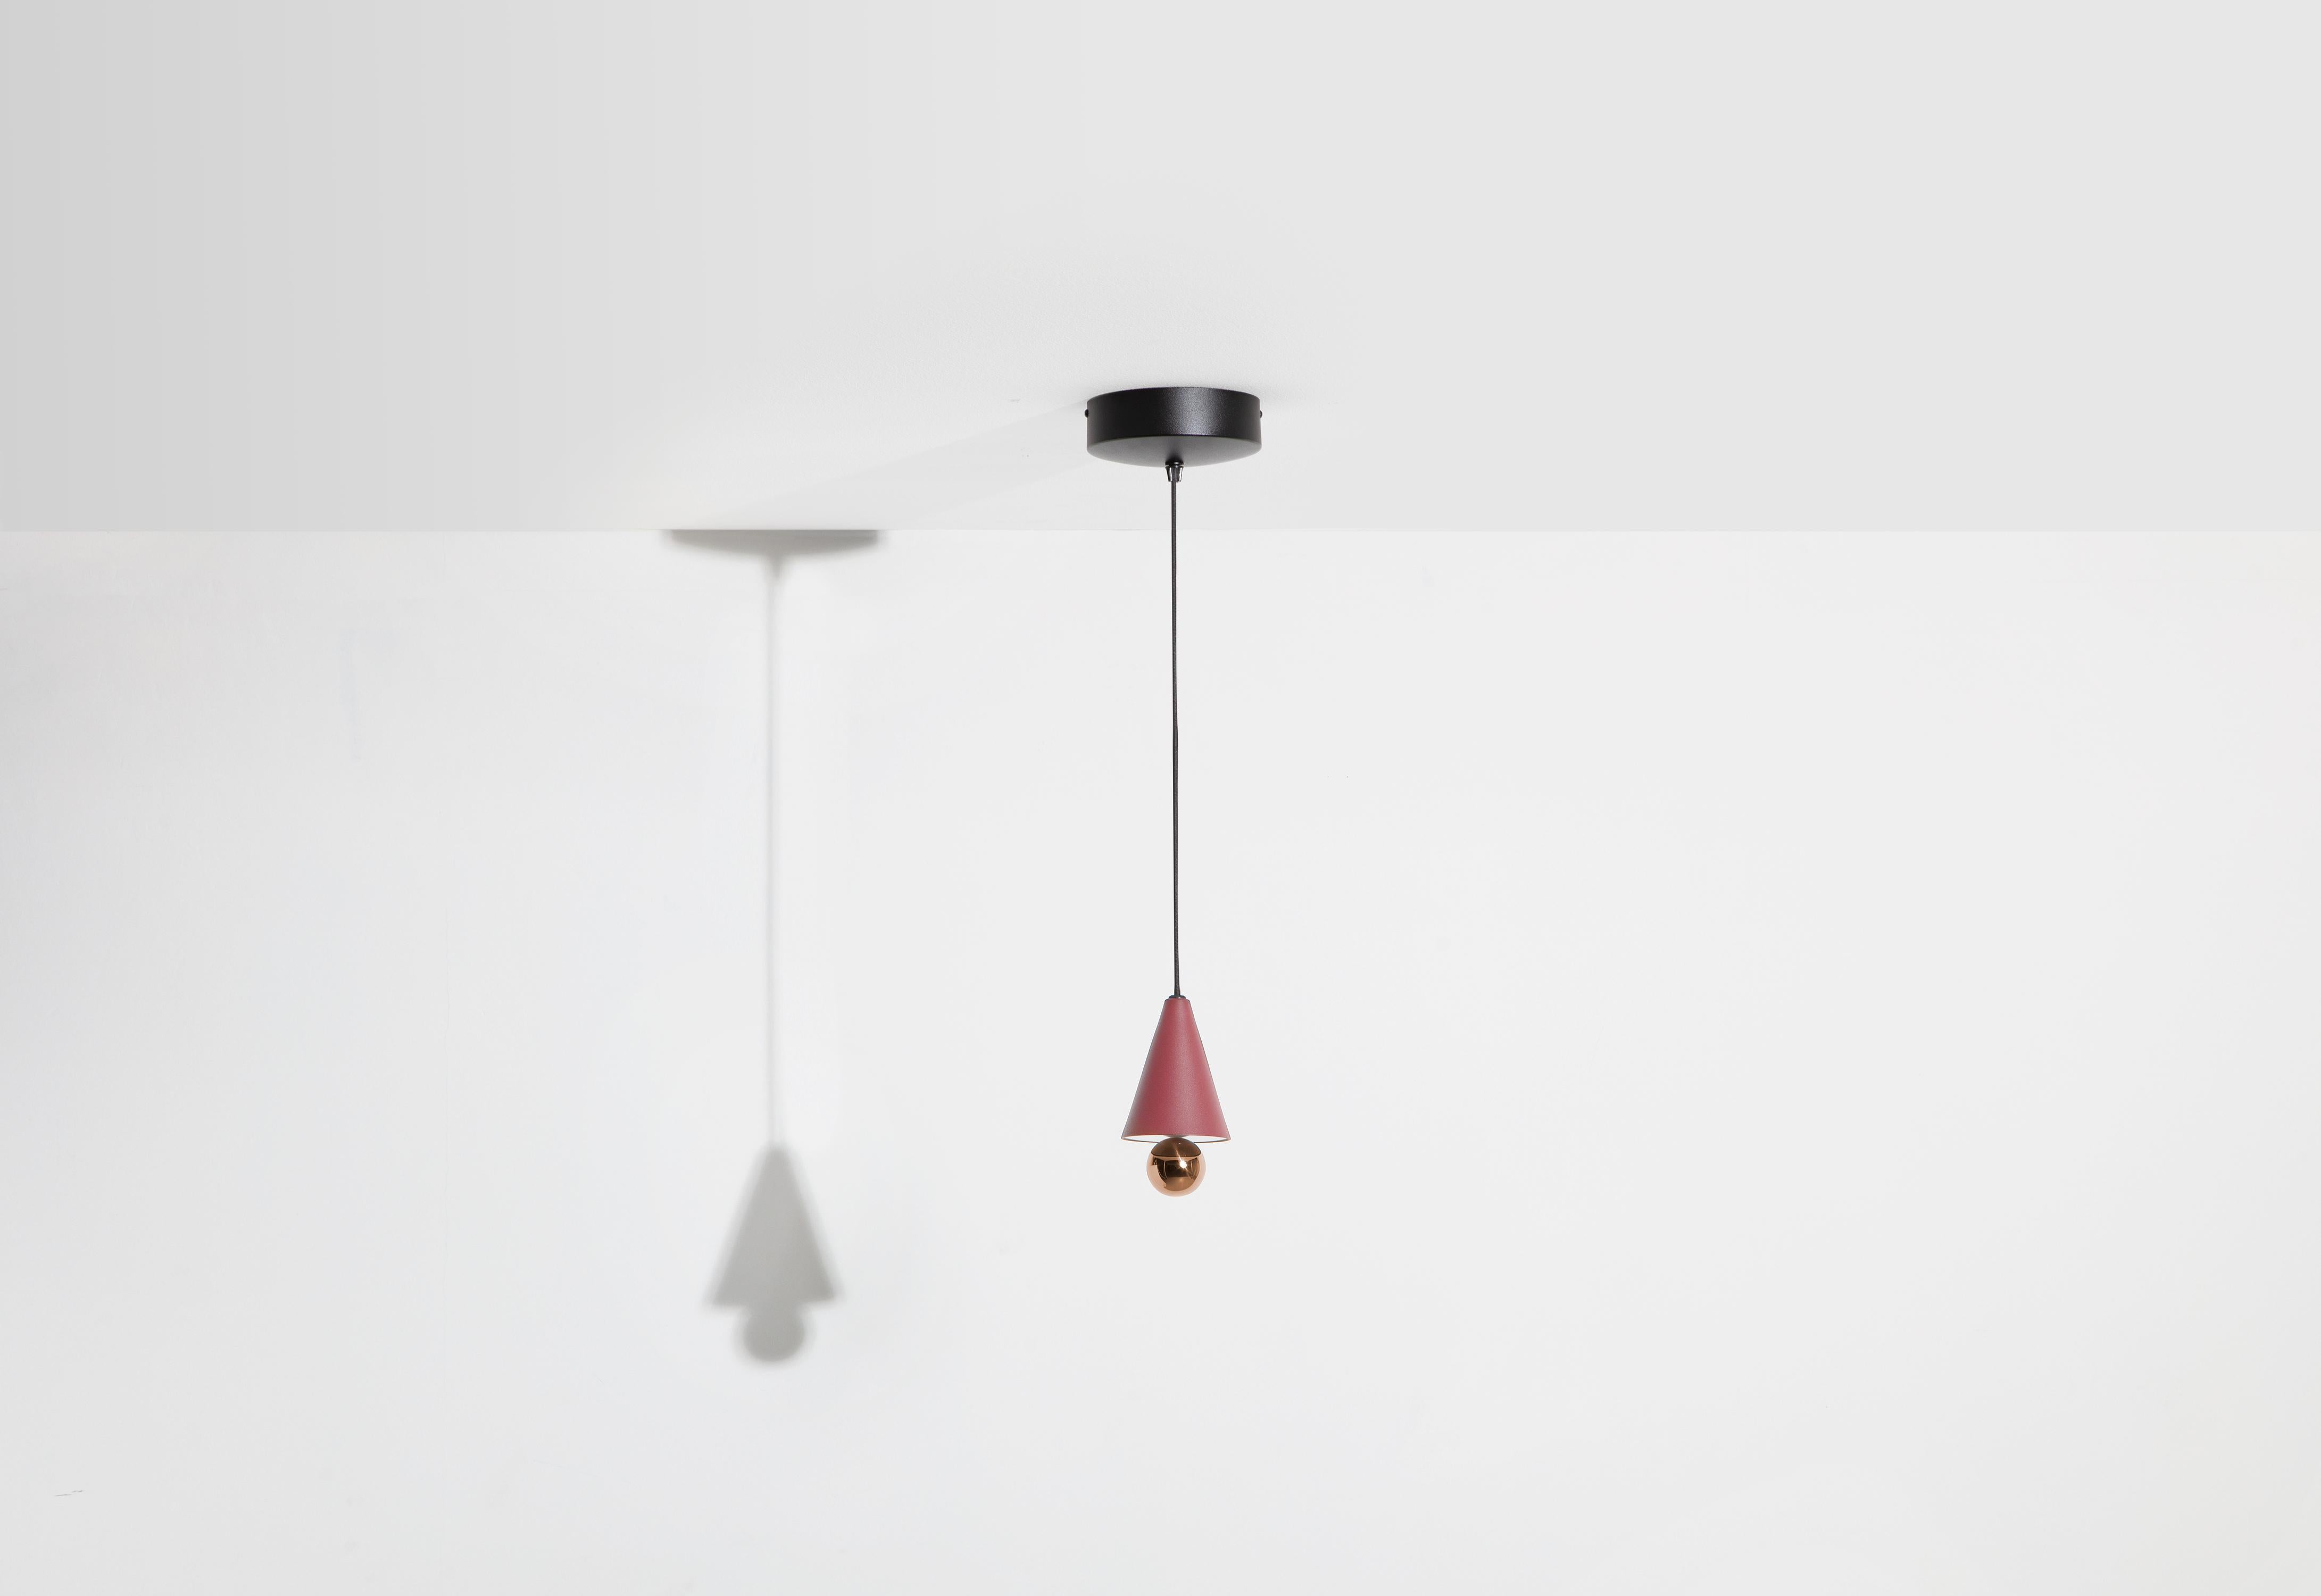 Petite Friture XS Cherry LED Pendant Light in Brown-red & Pink Gold Aluminium by Daniel and Emma, 2020

In 2015, the Australian duo designers Daniel and Emma signed Cherry a simple and minimalist pendant lamp design ; an aluminum cone with a